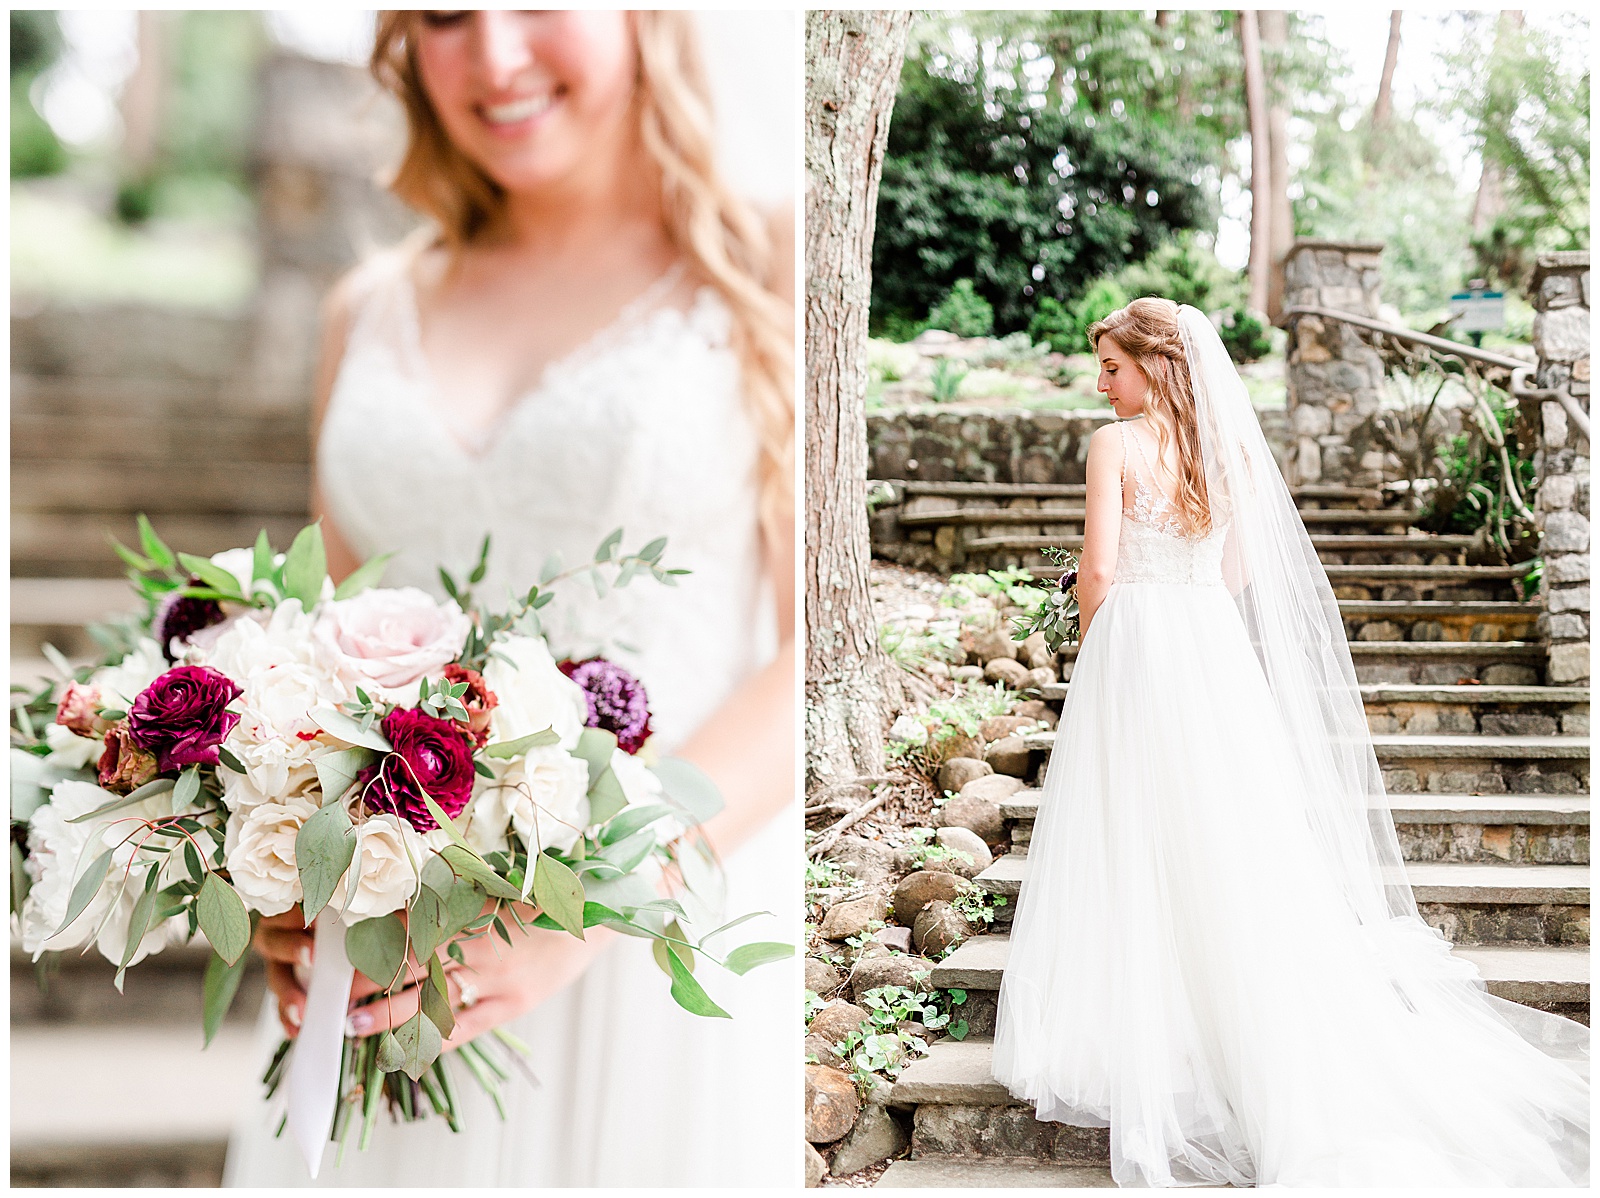 Gorgeous Bride in Simple V-Neck Lace wedding dress from Elegant Modern Summer Wedding in Charlotte, NC | check out the full wedding at KevynDixonPhoto.com